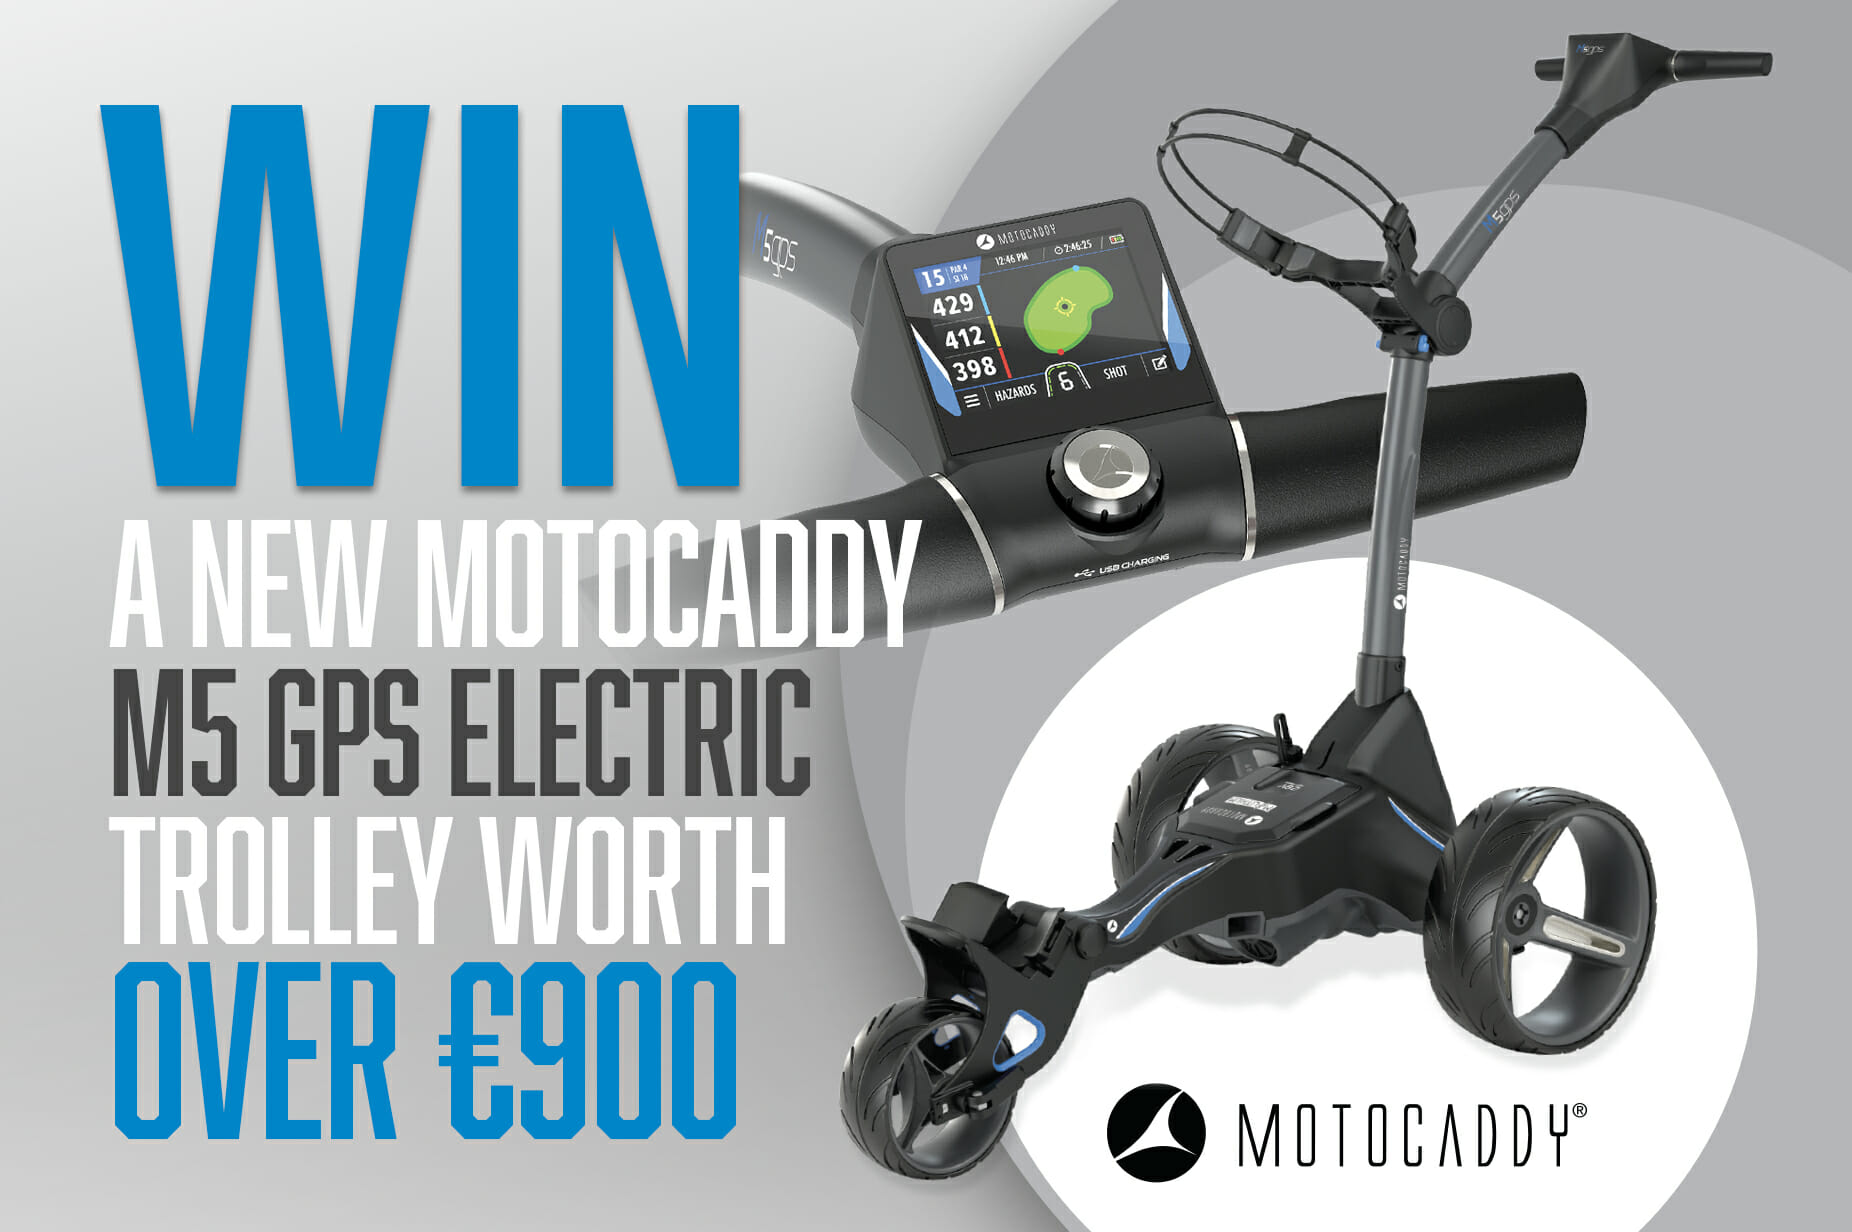 WIN a new Motocaddy M5 GPS Electric Trolley worth over €900!